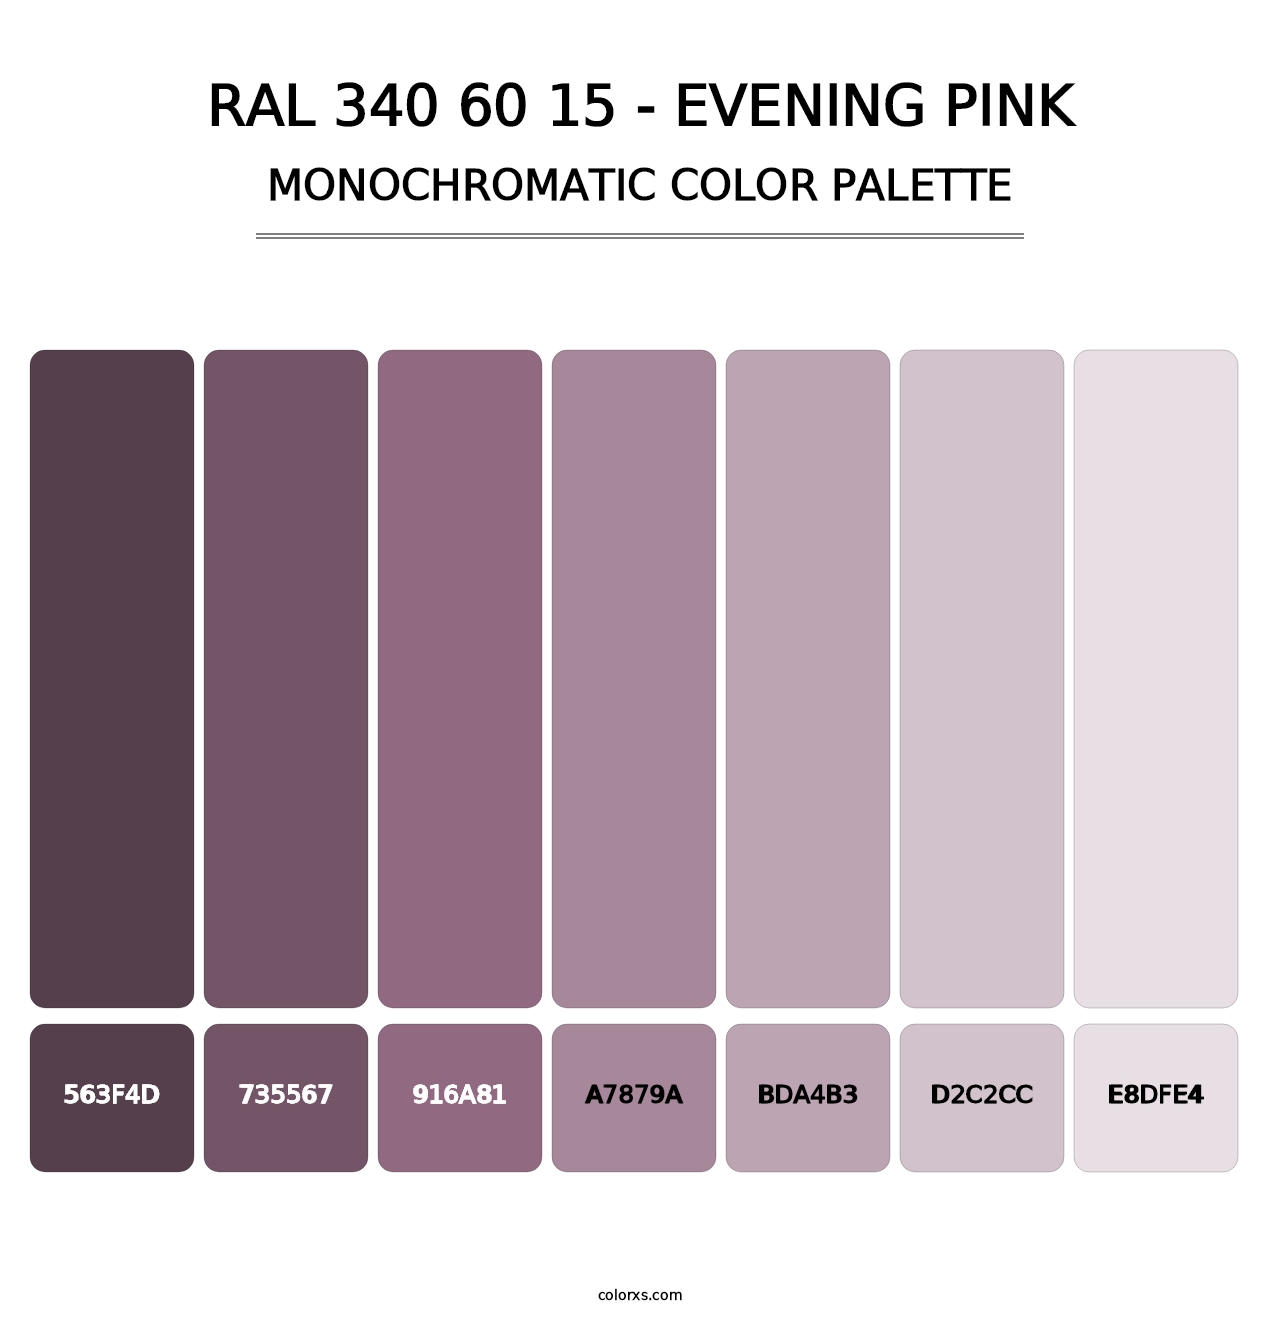 RAL 340 60 15 - Evening Pink - Monochromatic Color Palette